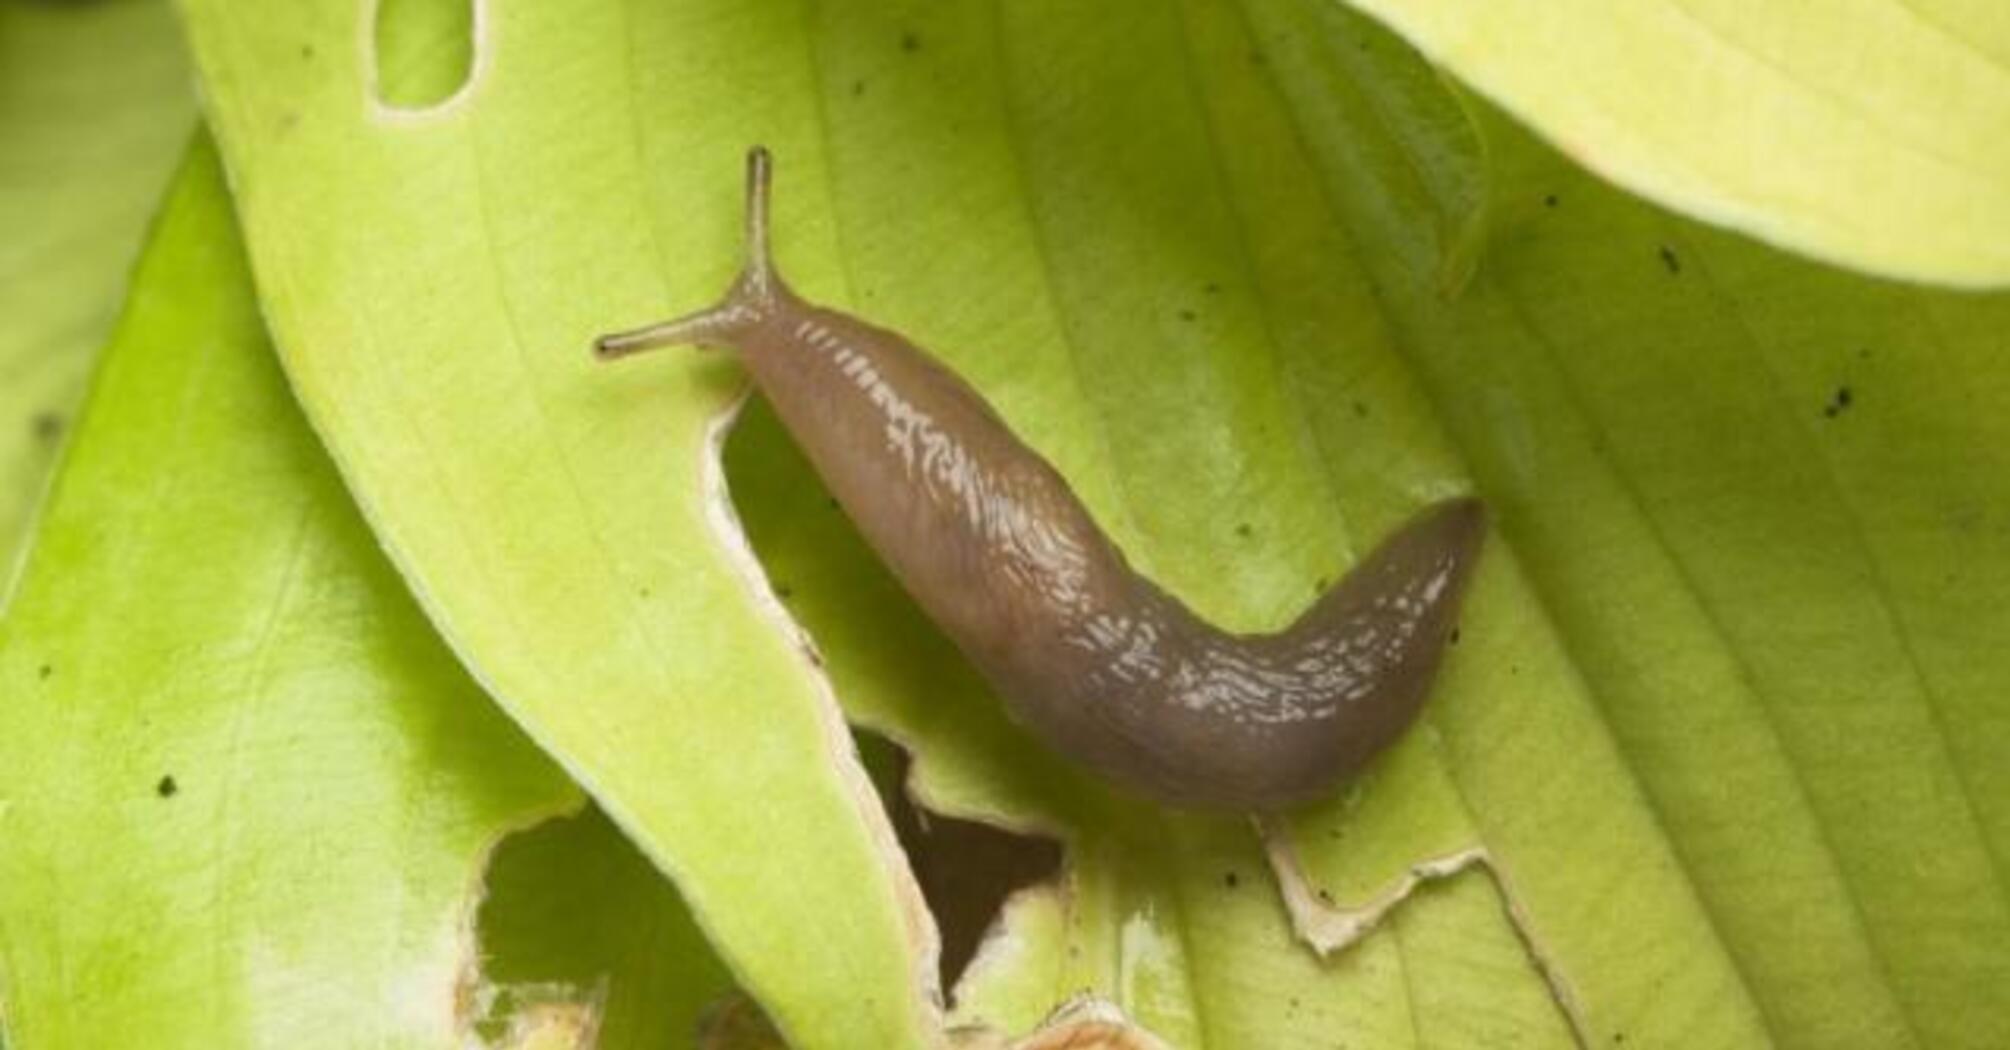 How to effectively and safely drive slugs out of the garden